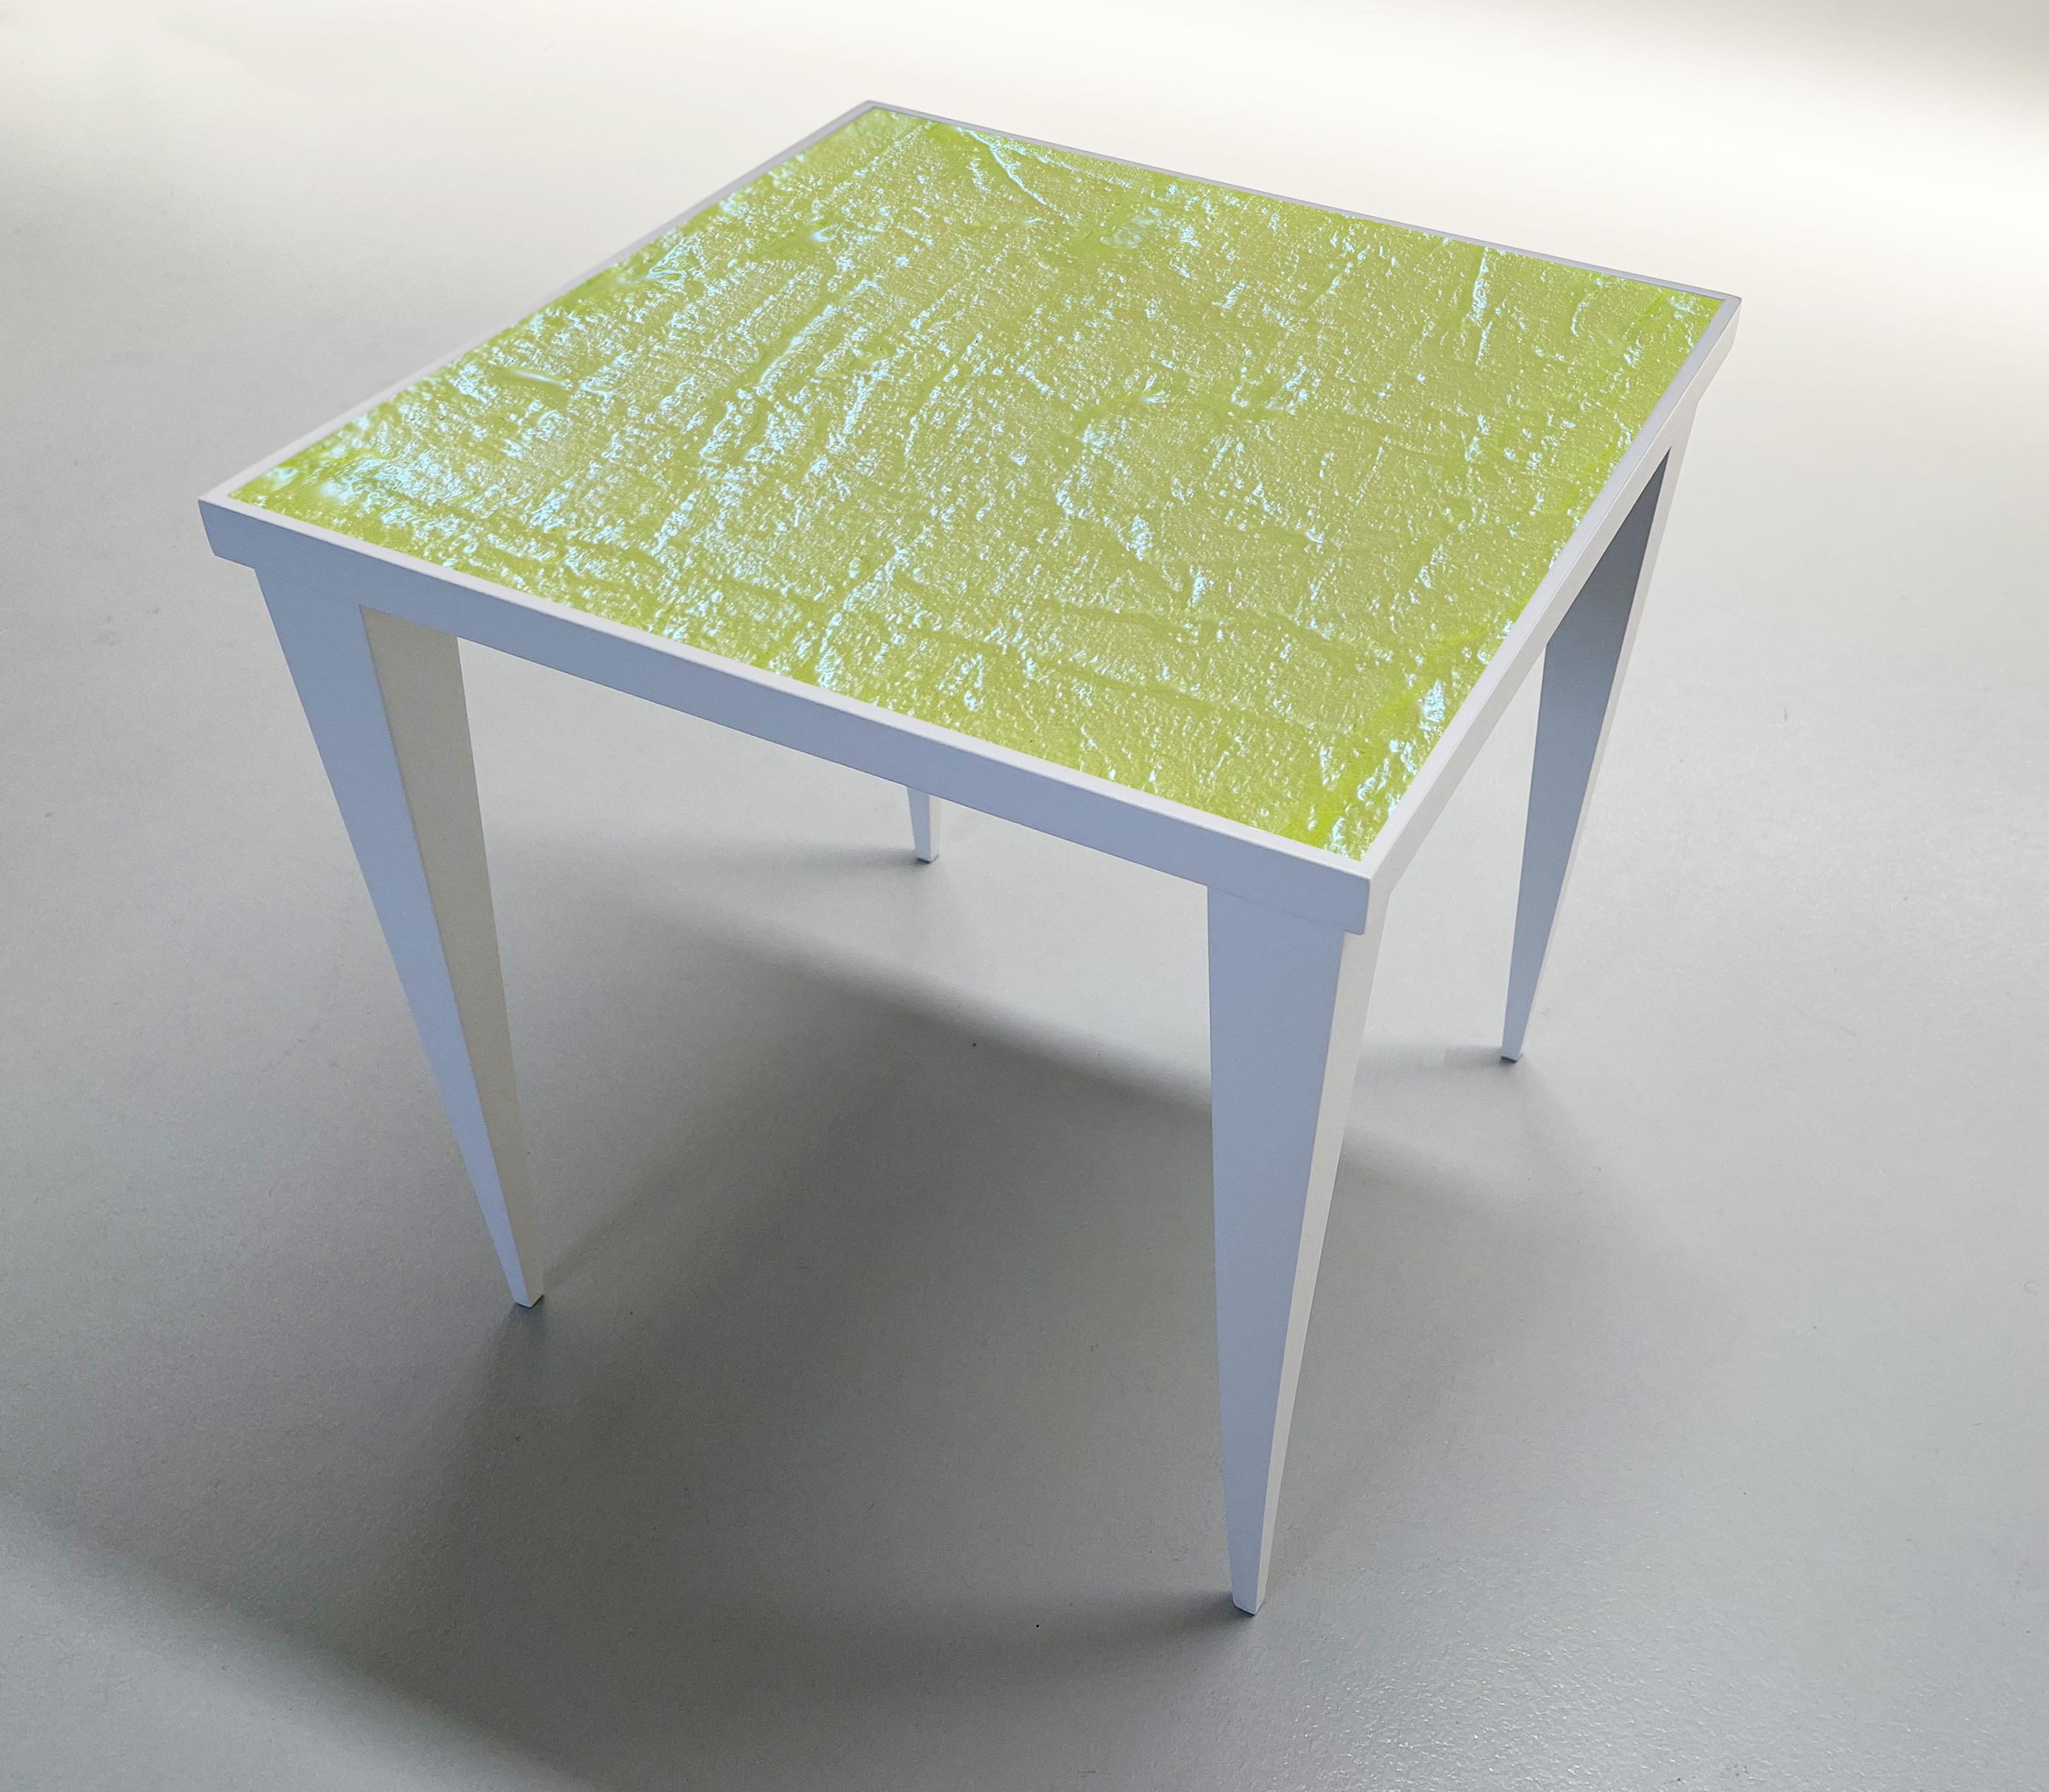 The ‘Square’ table is innovative and contemporary.
The support structure is made with oak wood with white finish.
The crystal top is handcrafted at the bottom. The finish of the crystal is yellow with iridescent reflections.
The crystal motif and